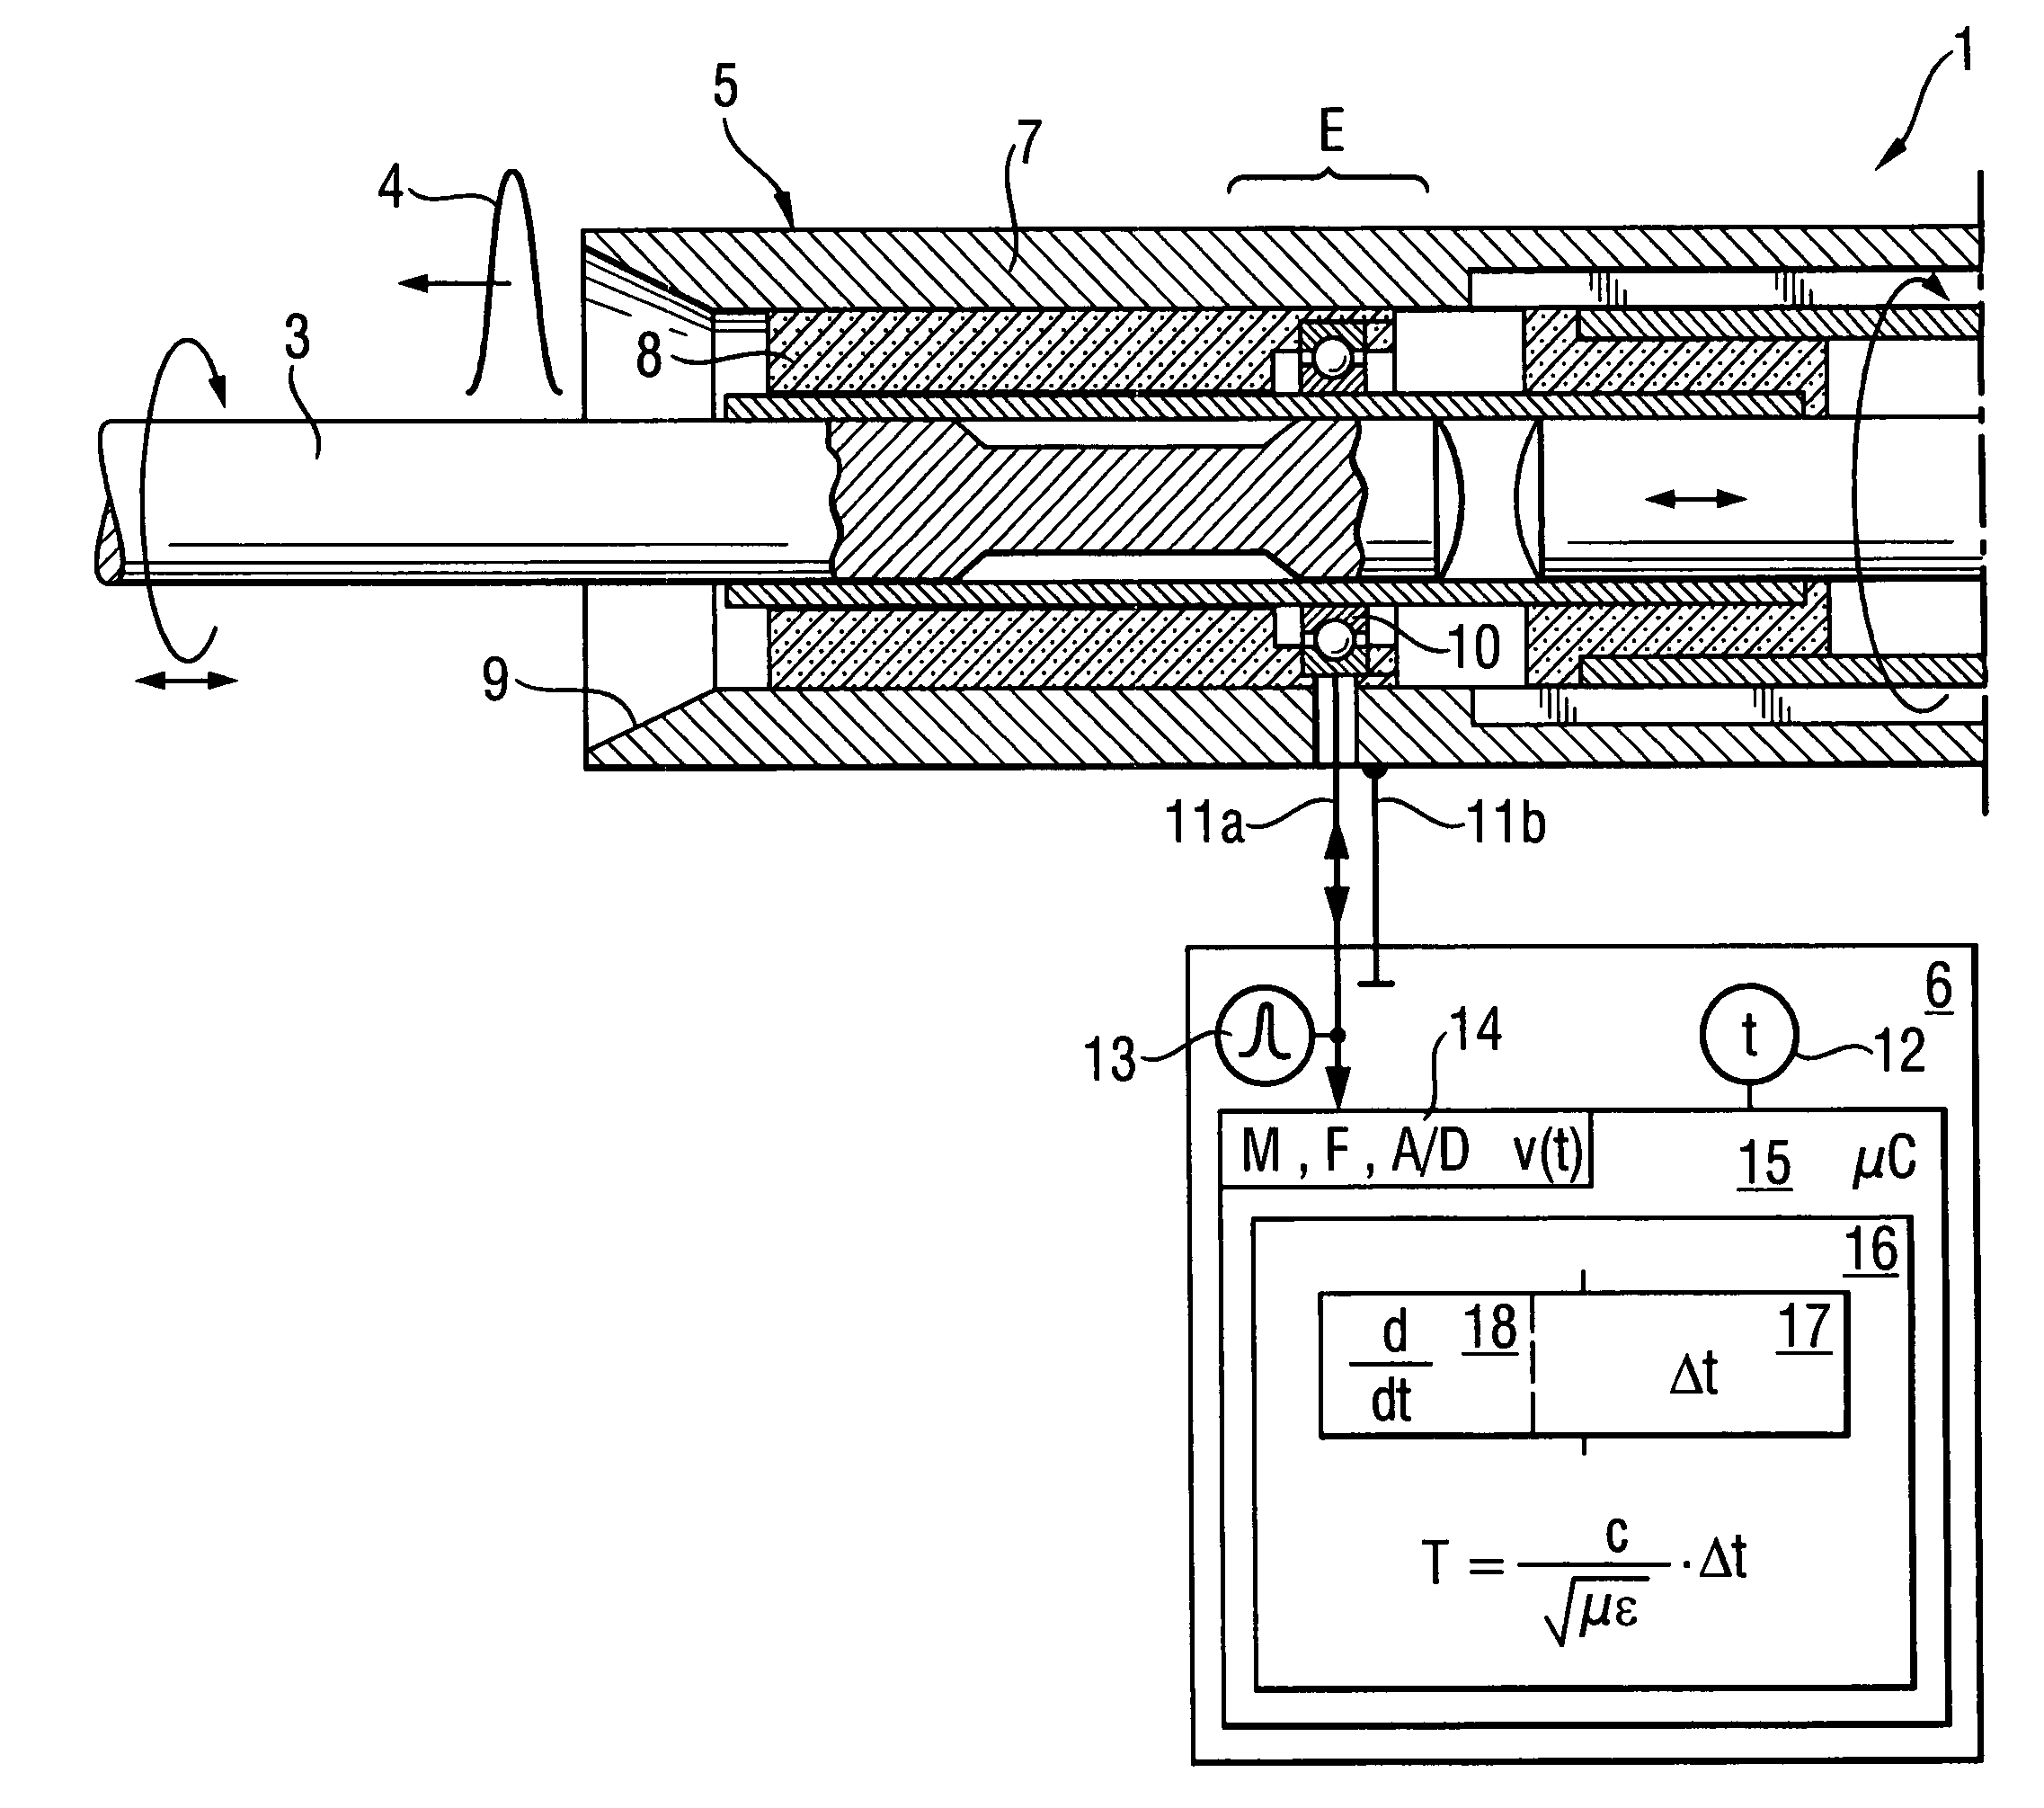 Power tool with measurement of a penetration depth of a working tool